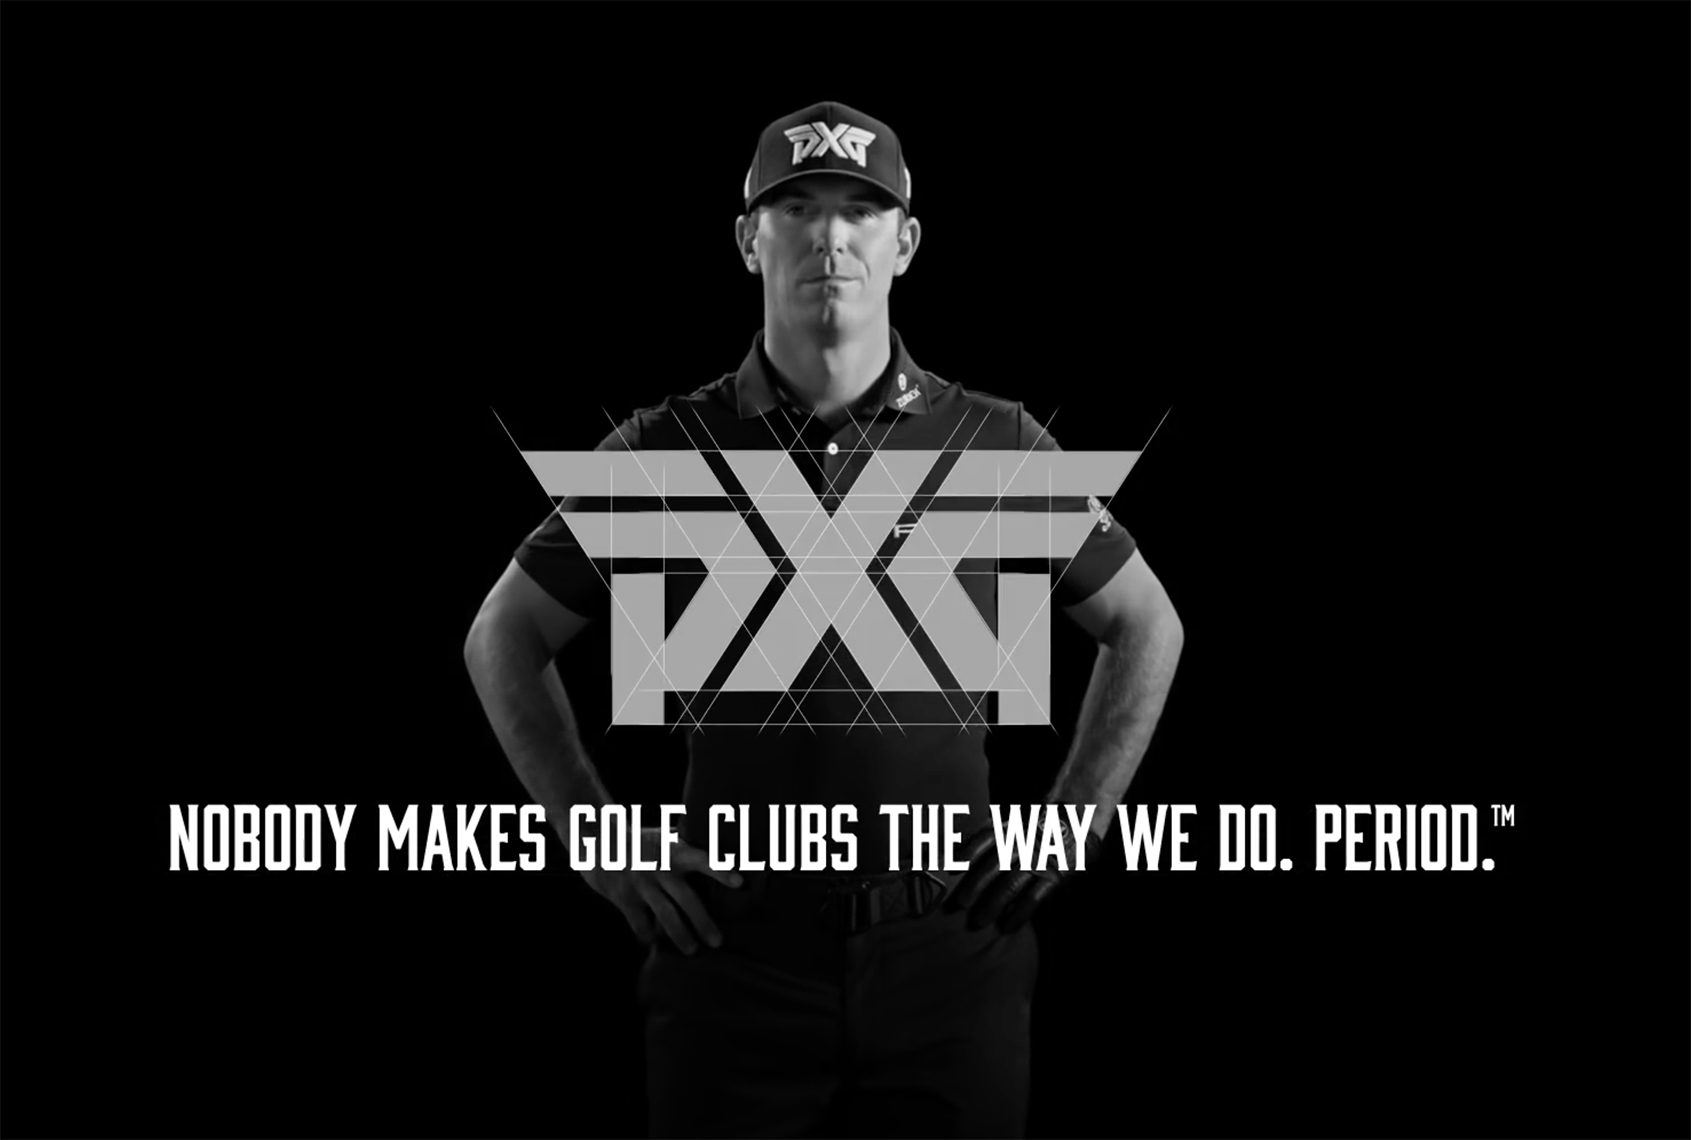 PXG Unlimited Commercial